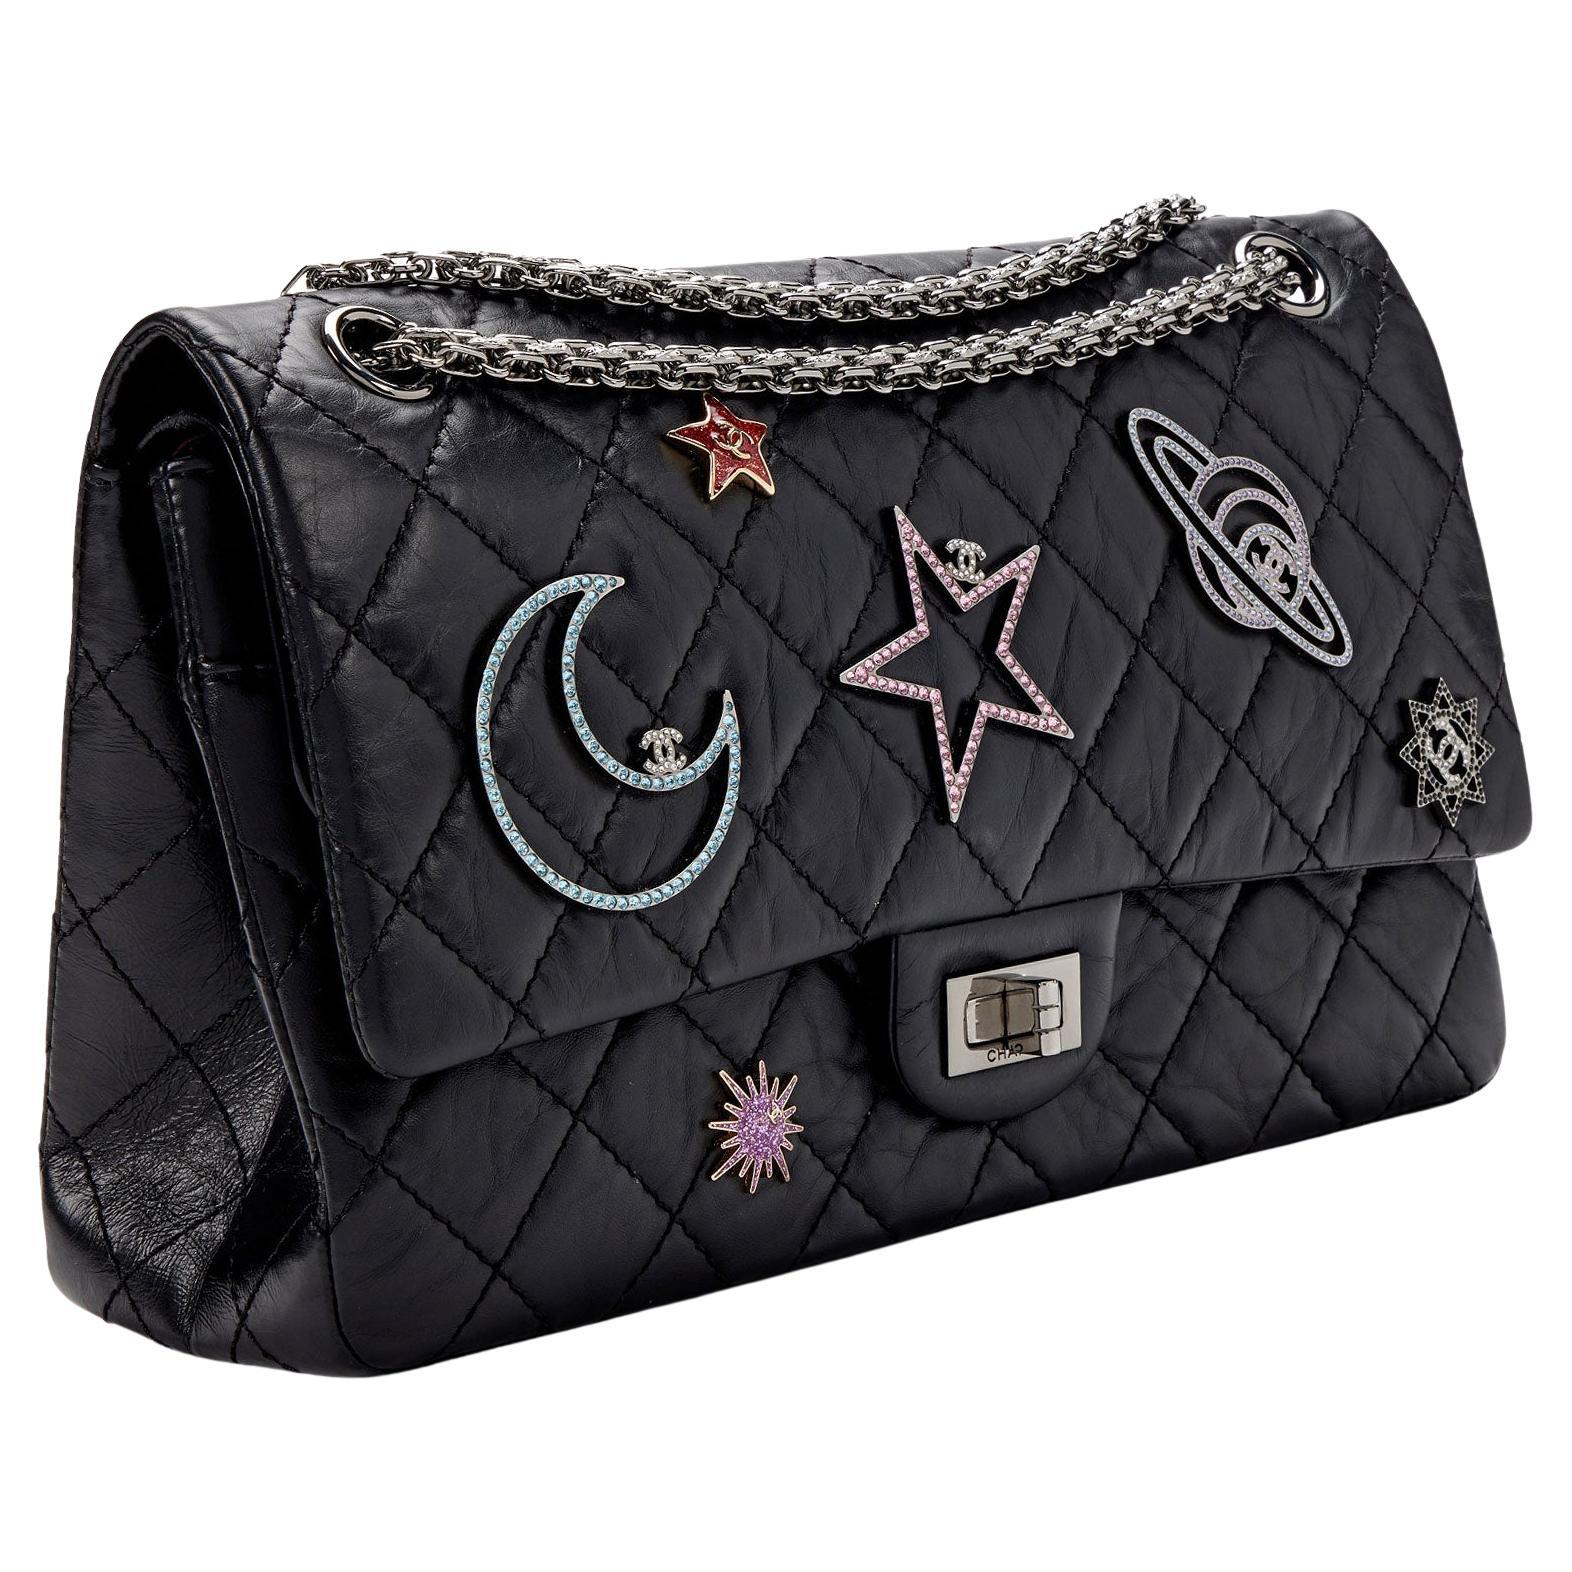 Quilted Chanel 226 reissue black lambskin space charm flap with mademoiselle closure and reissue chain

Year: 2017
Silver hardware
Space astronomy inspired charms
Interior flap zippered pocket
Interior flap
Interior open pockets
Classic back